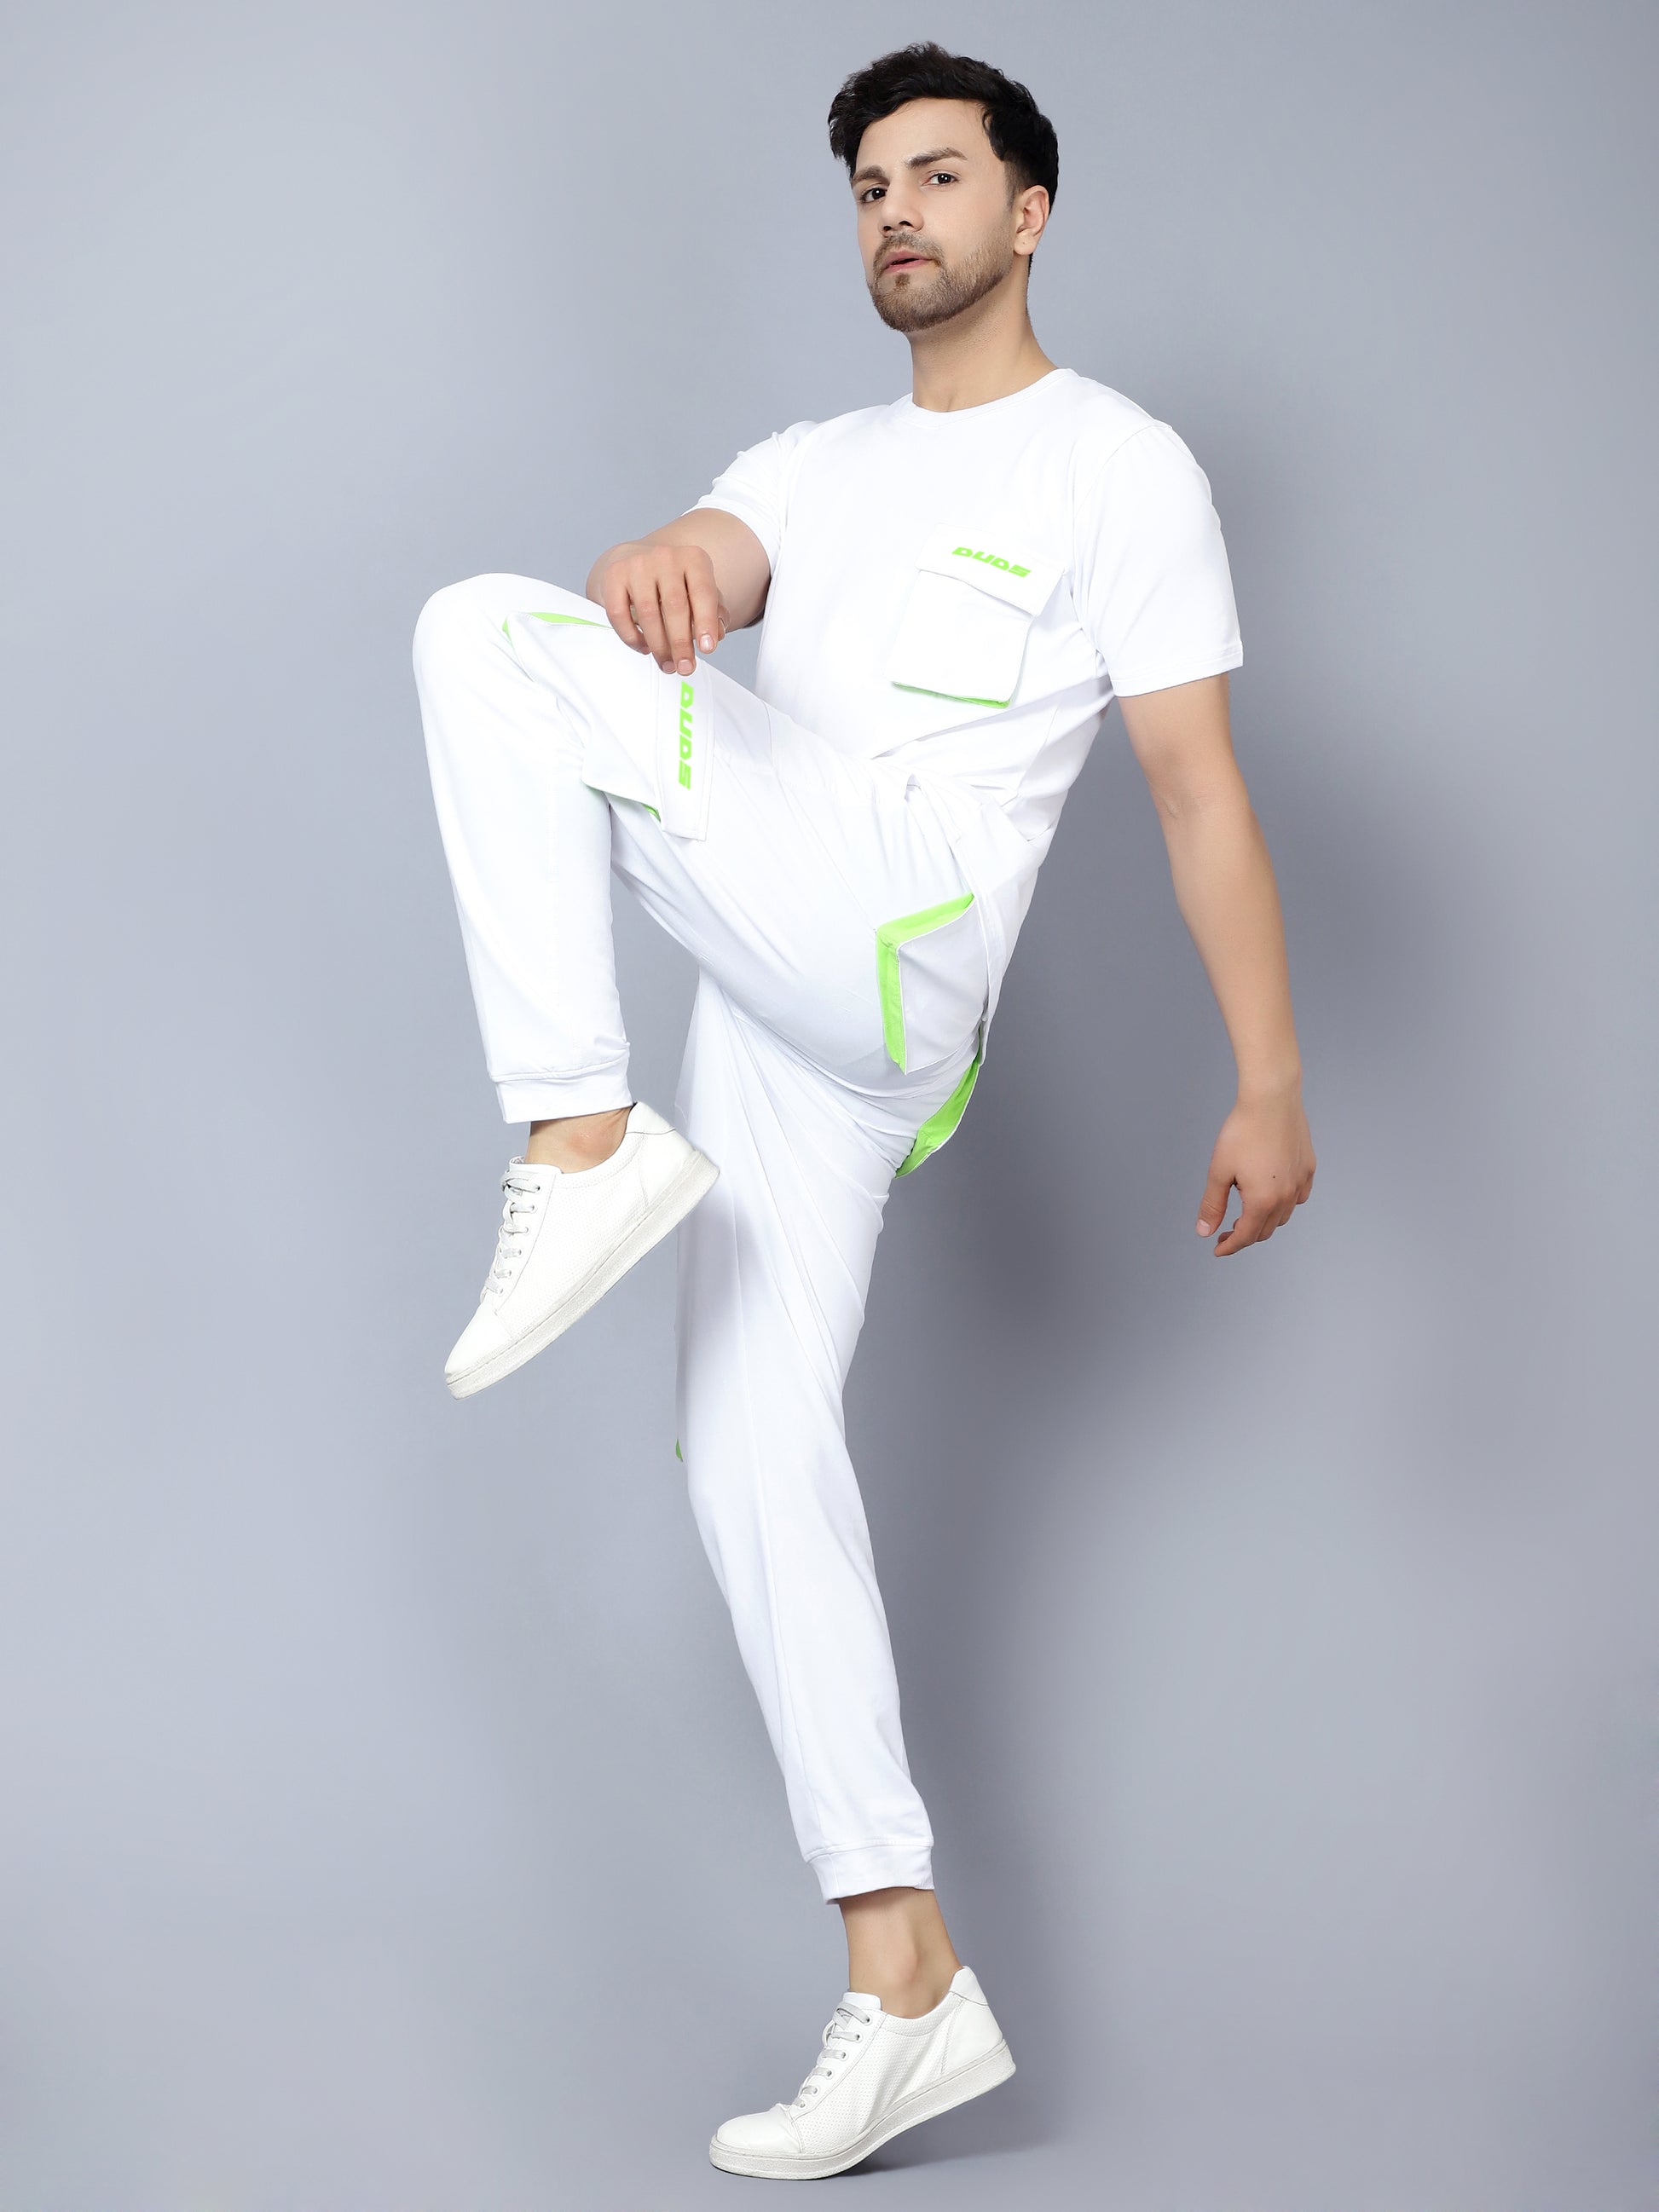 Cargo T-Shirt (White With Neon Green Highlighter) - Wearduds